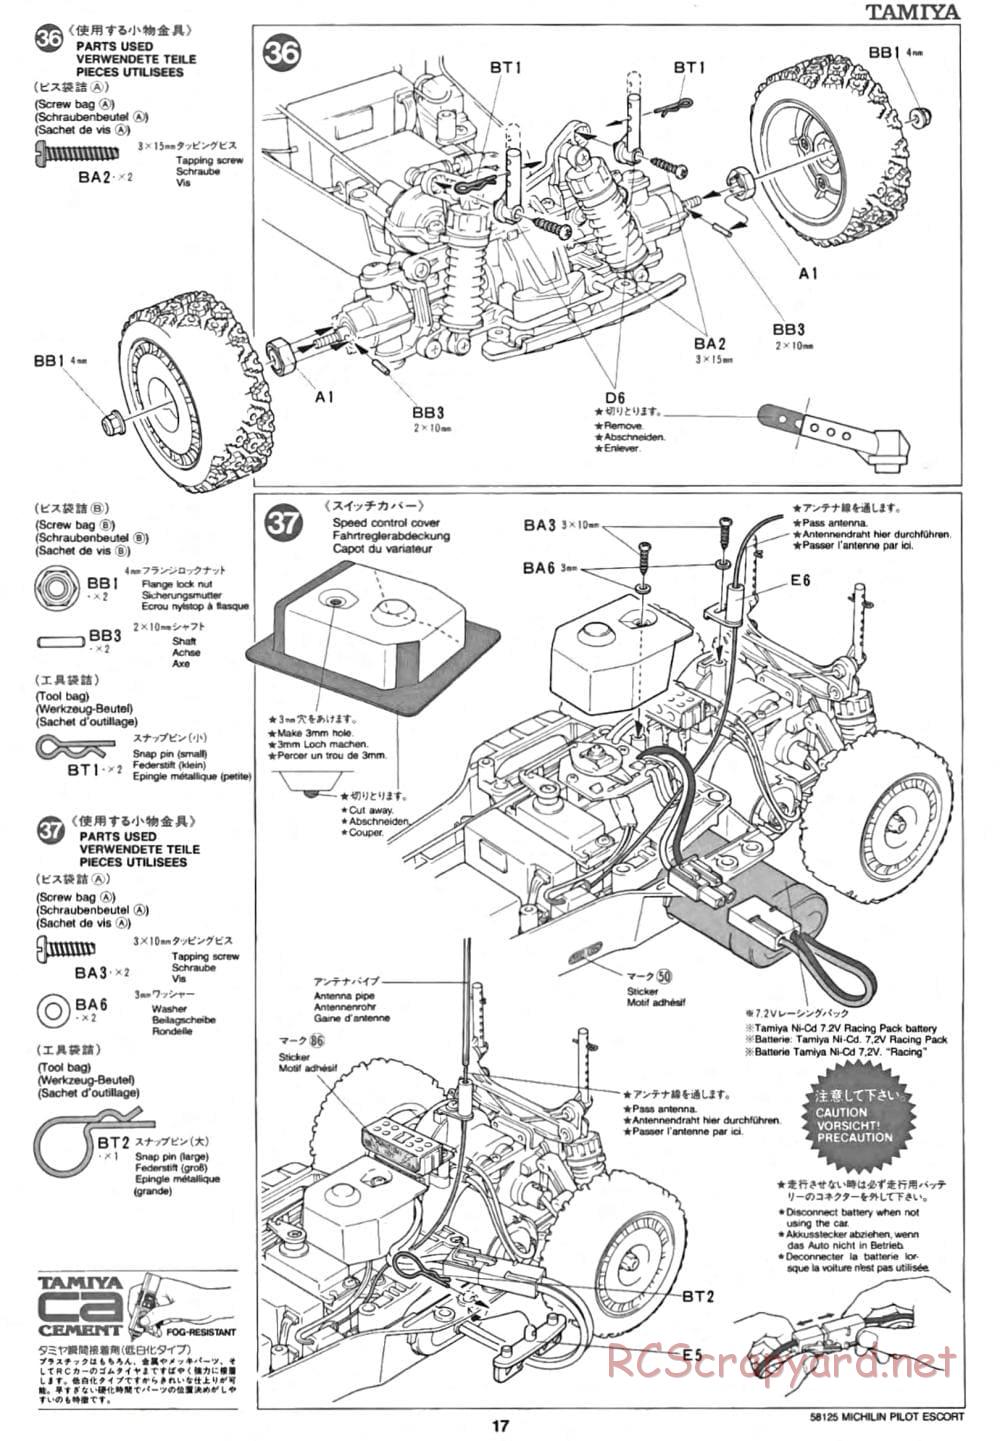 Tamiya - Michelin Pilot Ford Escort RS Cosworth - TA-01 Chassis - Manual - Page 17